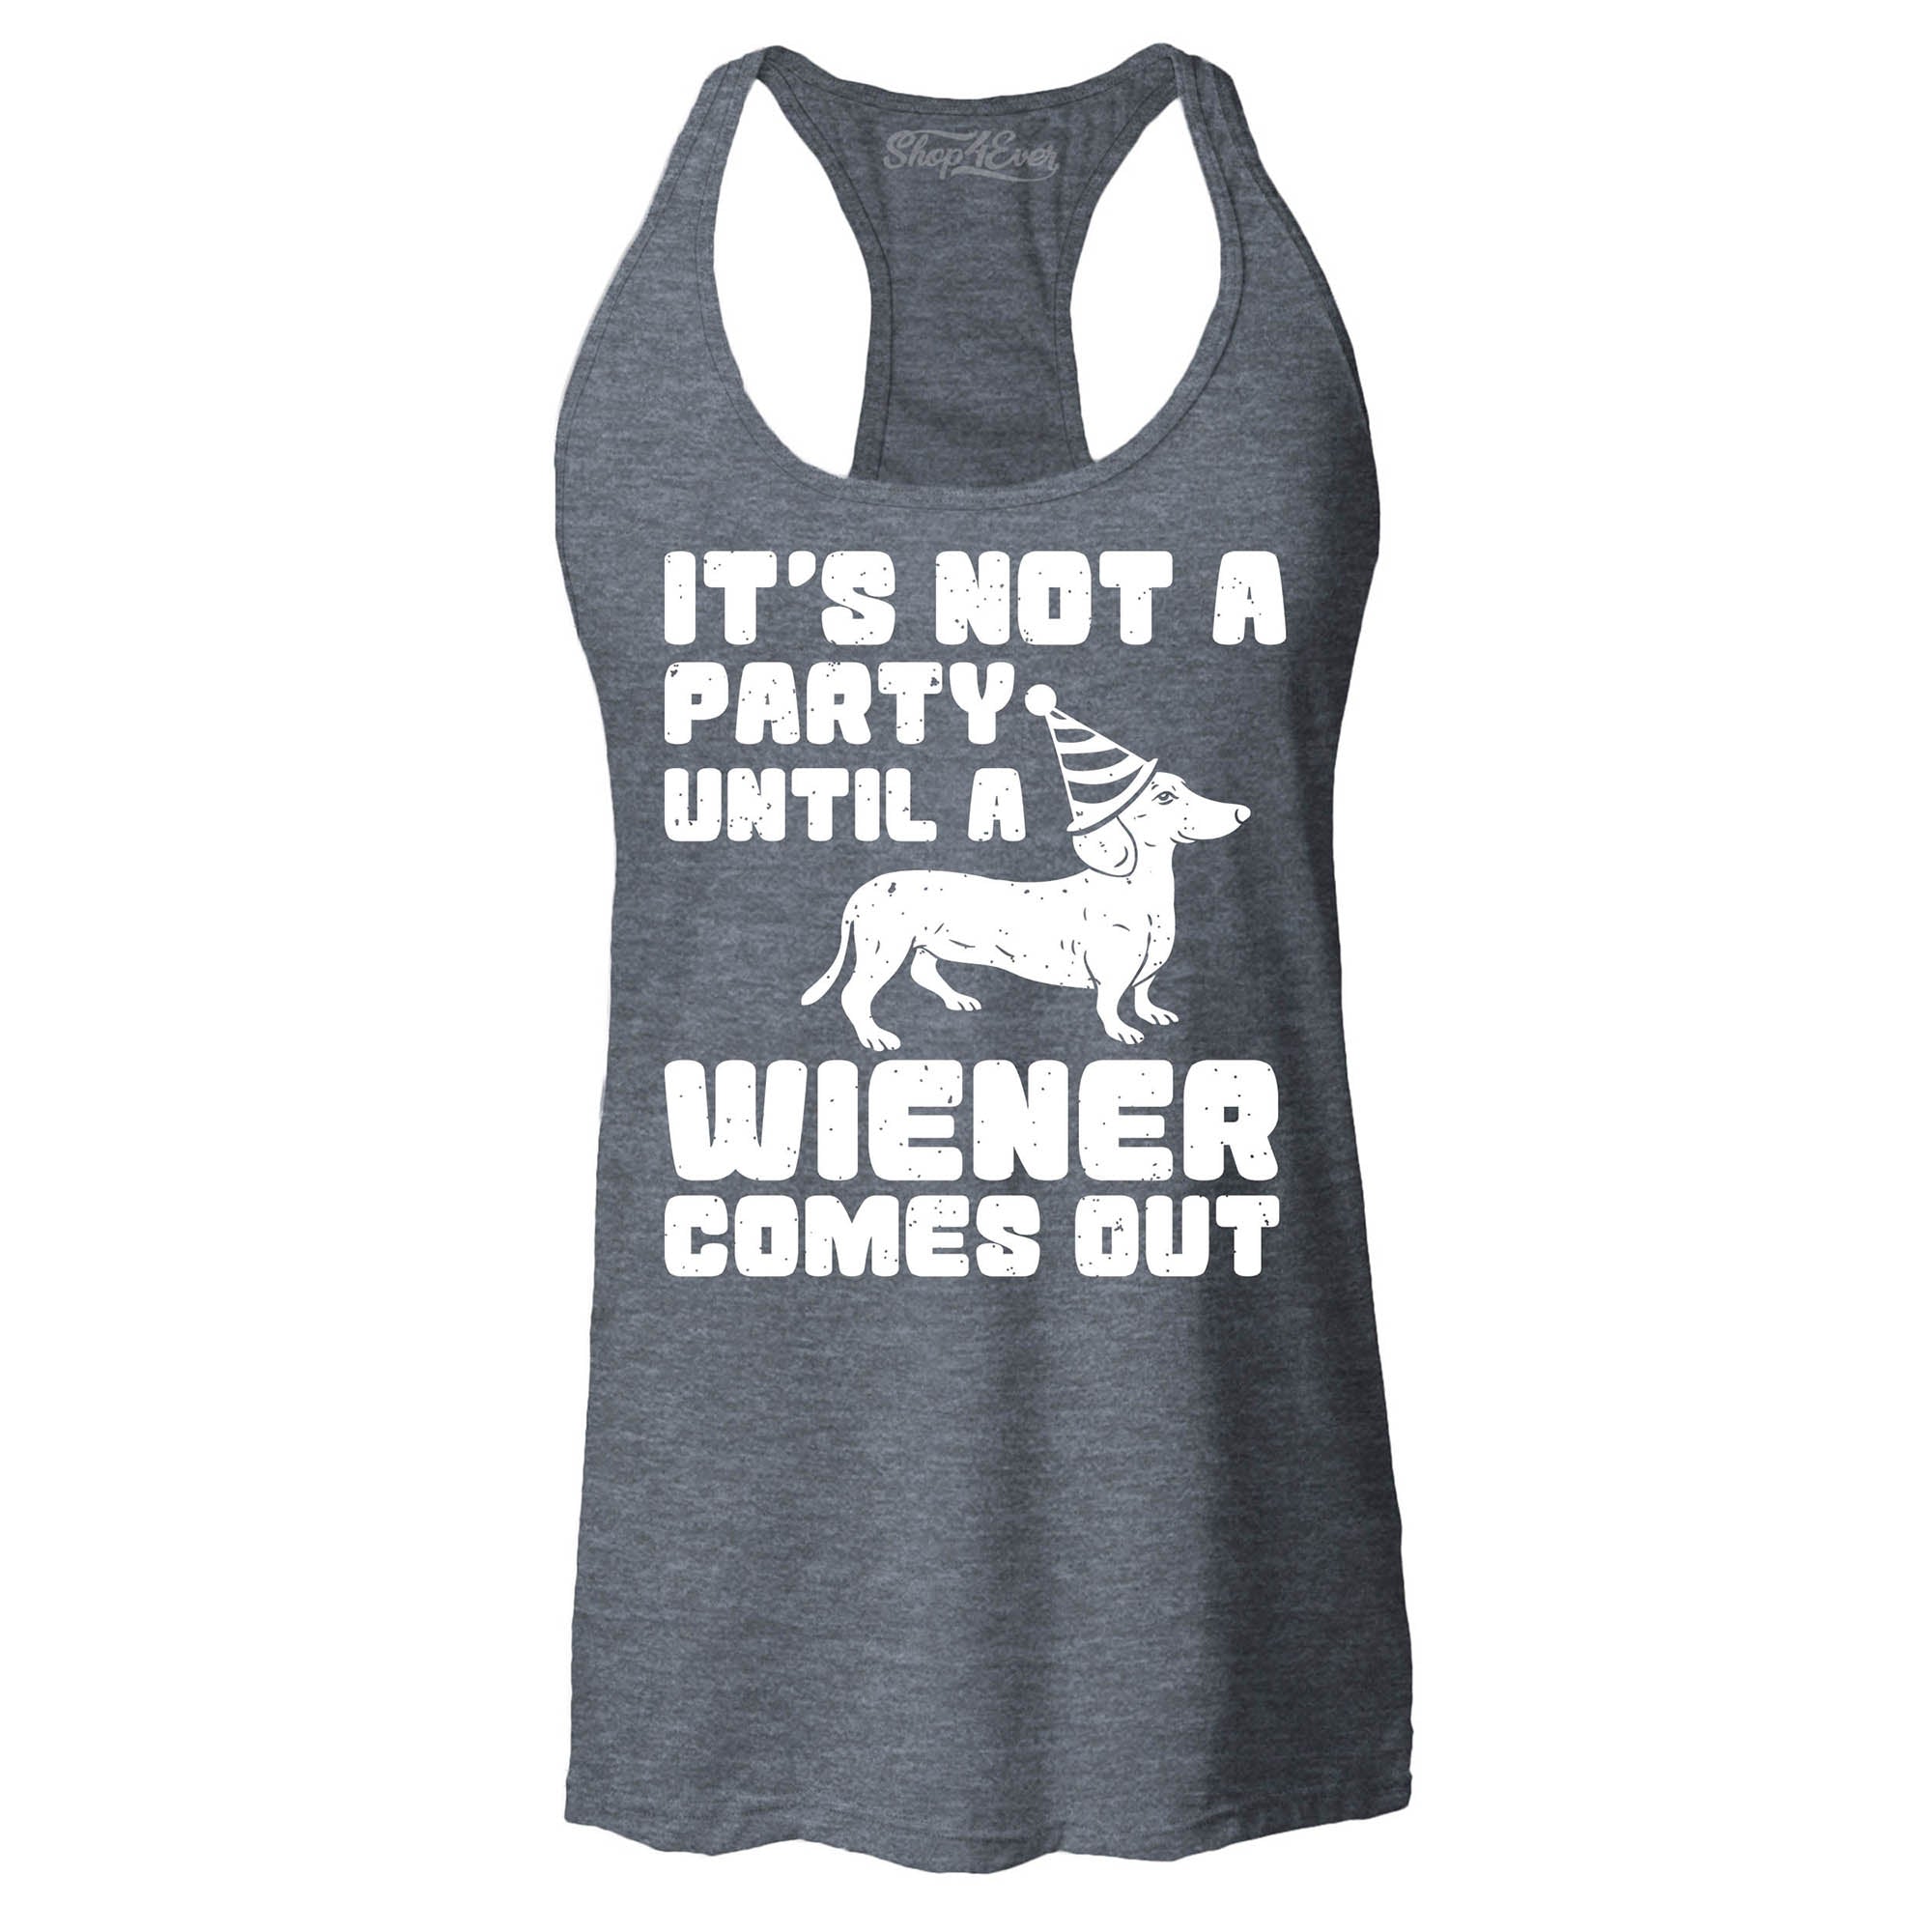 It's Not a Party Until The Wiener Comes Out Funny Dachshund Women's Racerback Tank Top Slim Fit